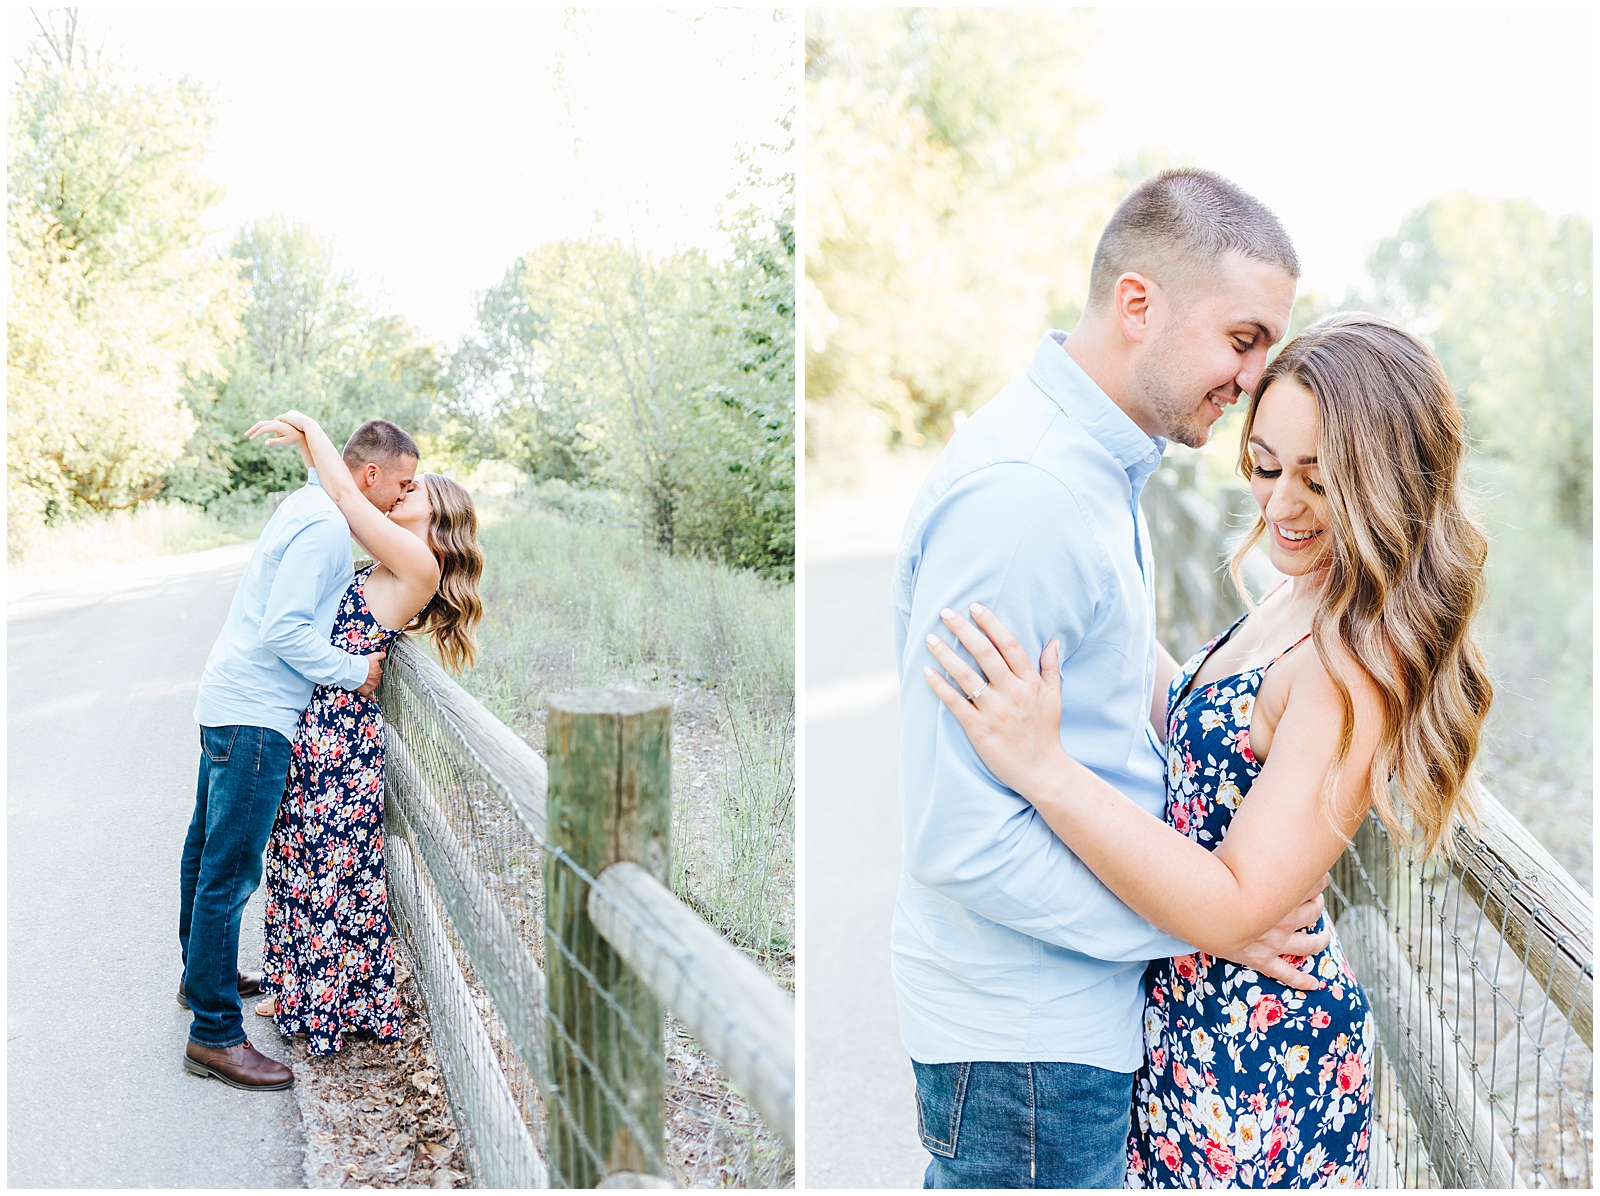 Romantic Light and Airy Spring Engagement Session on the Boise River